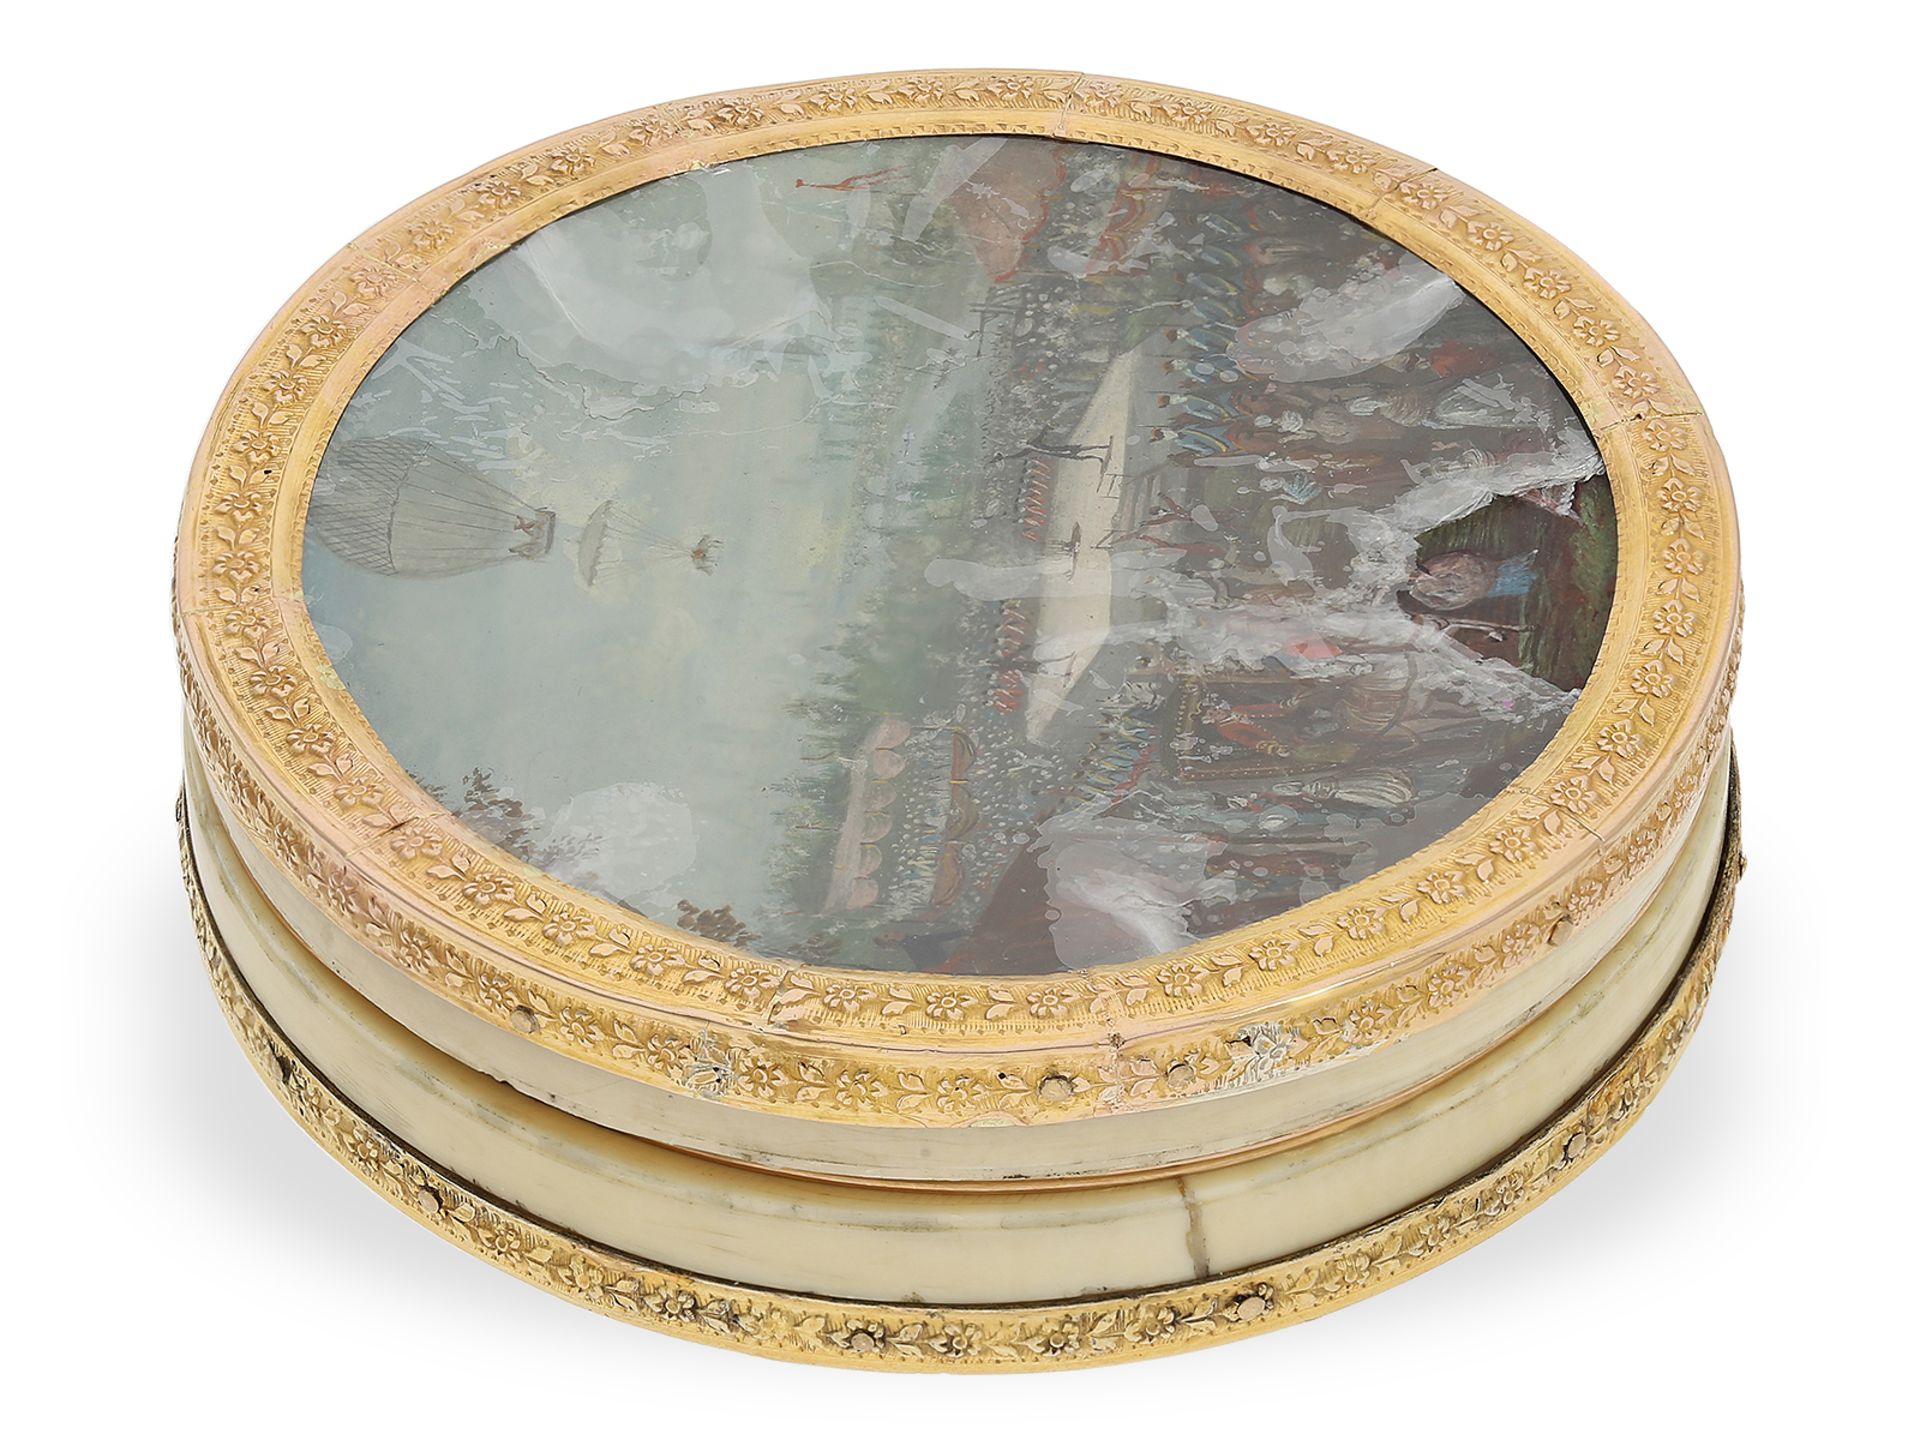 Unique antique snuff box, gold/ivory/tortoiseshell, painting "Circus Spectacle with Rise of a Balloo - Image 4 of 5